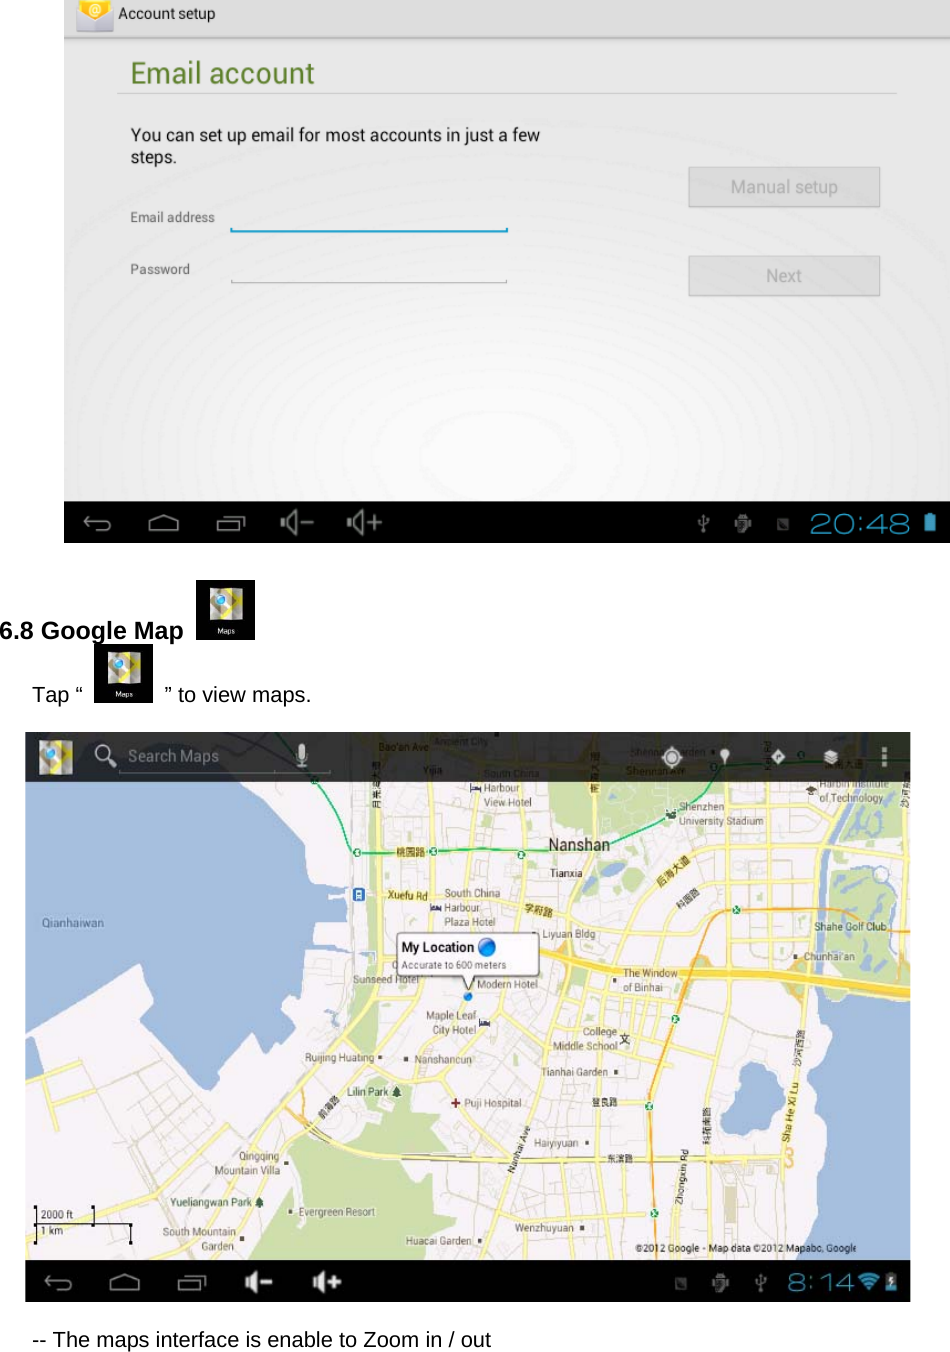   6.8 Google Map    Tap “   ” to view maps.    -- The maps interface is enable to Zoom in / out 